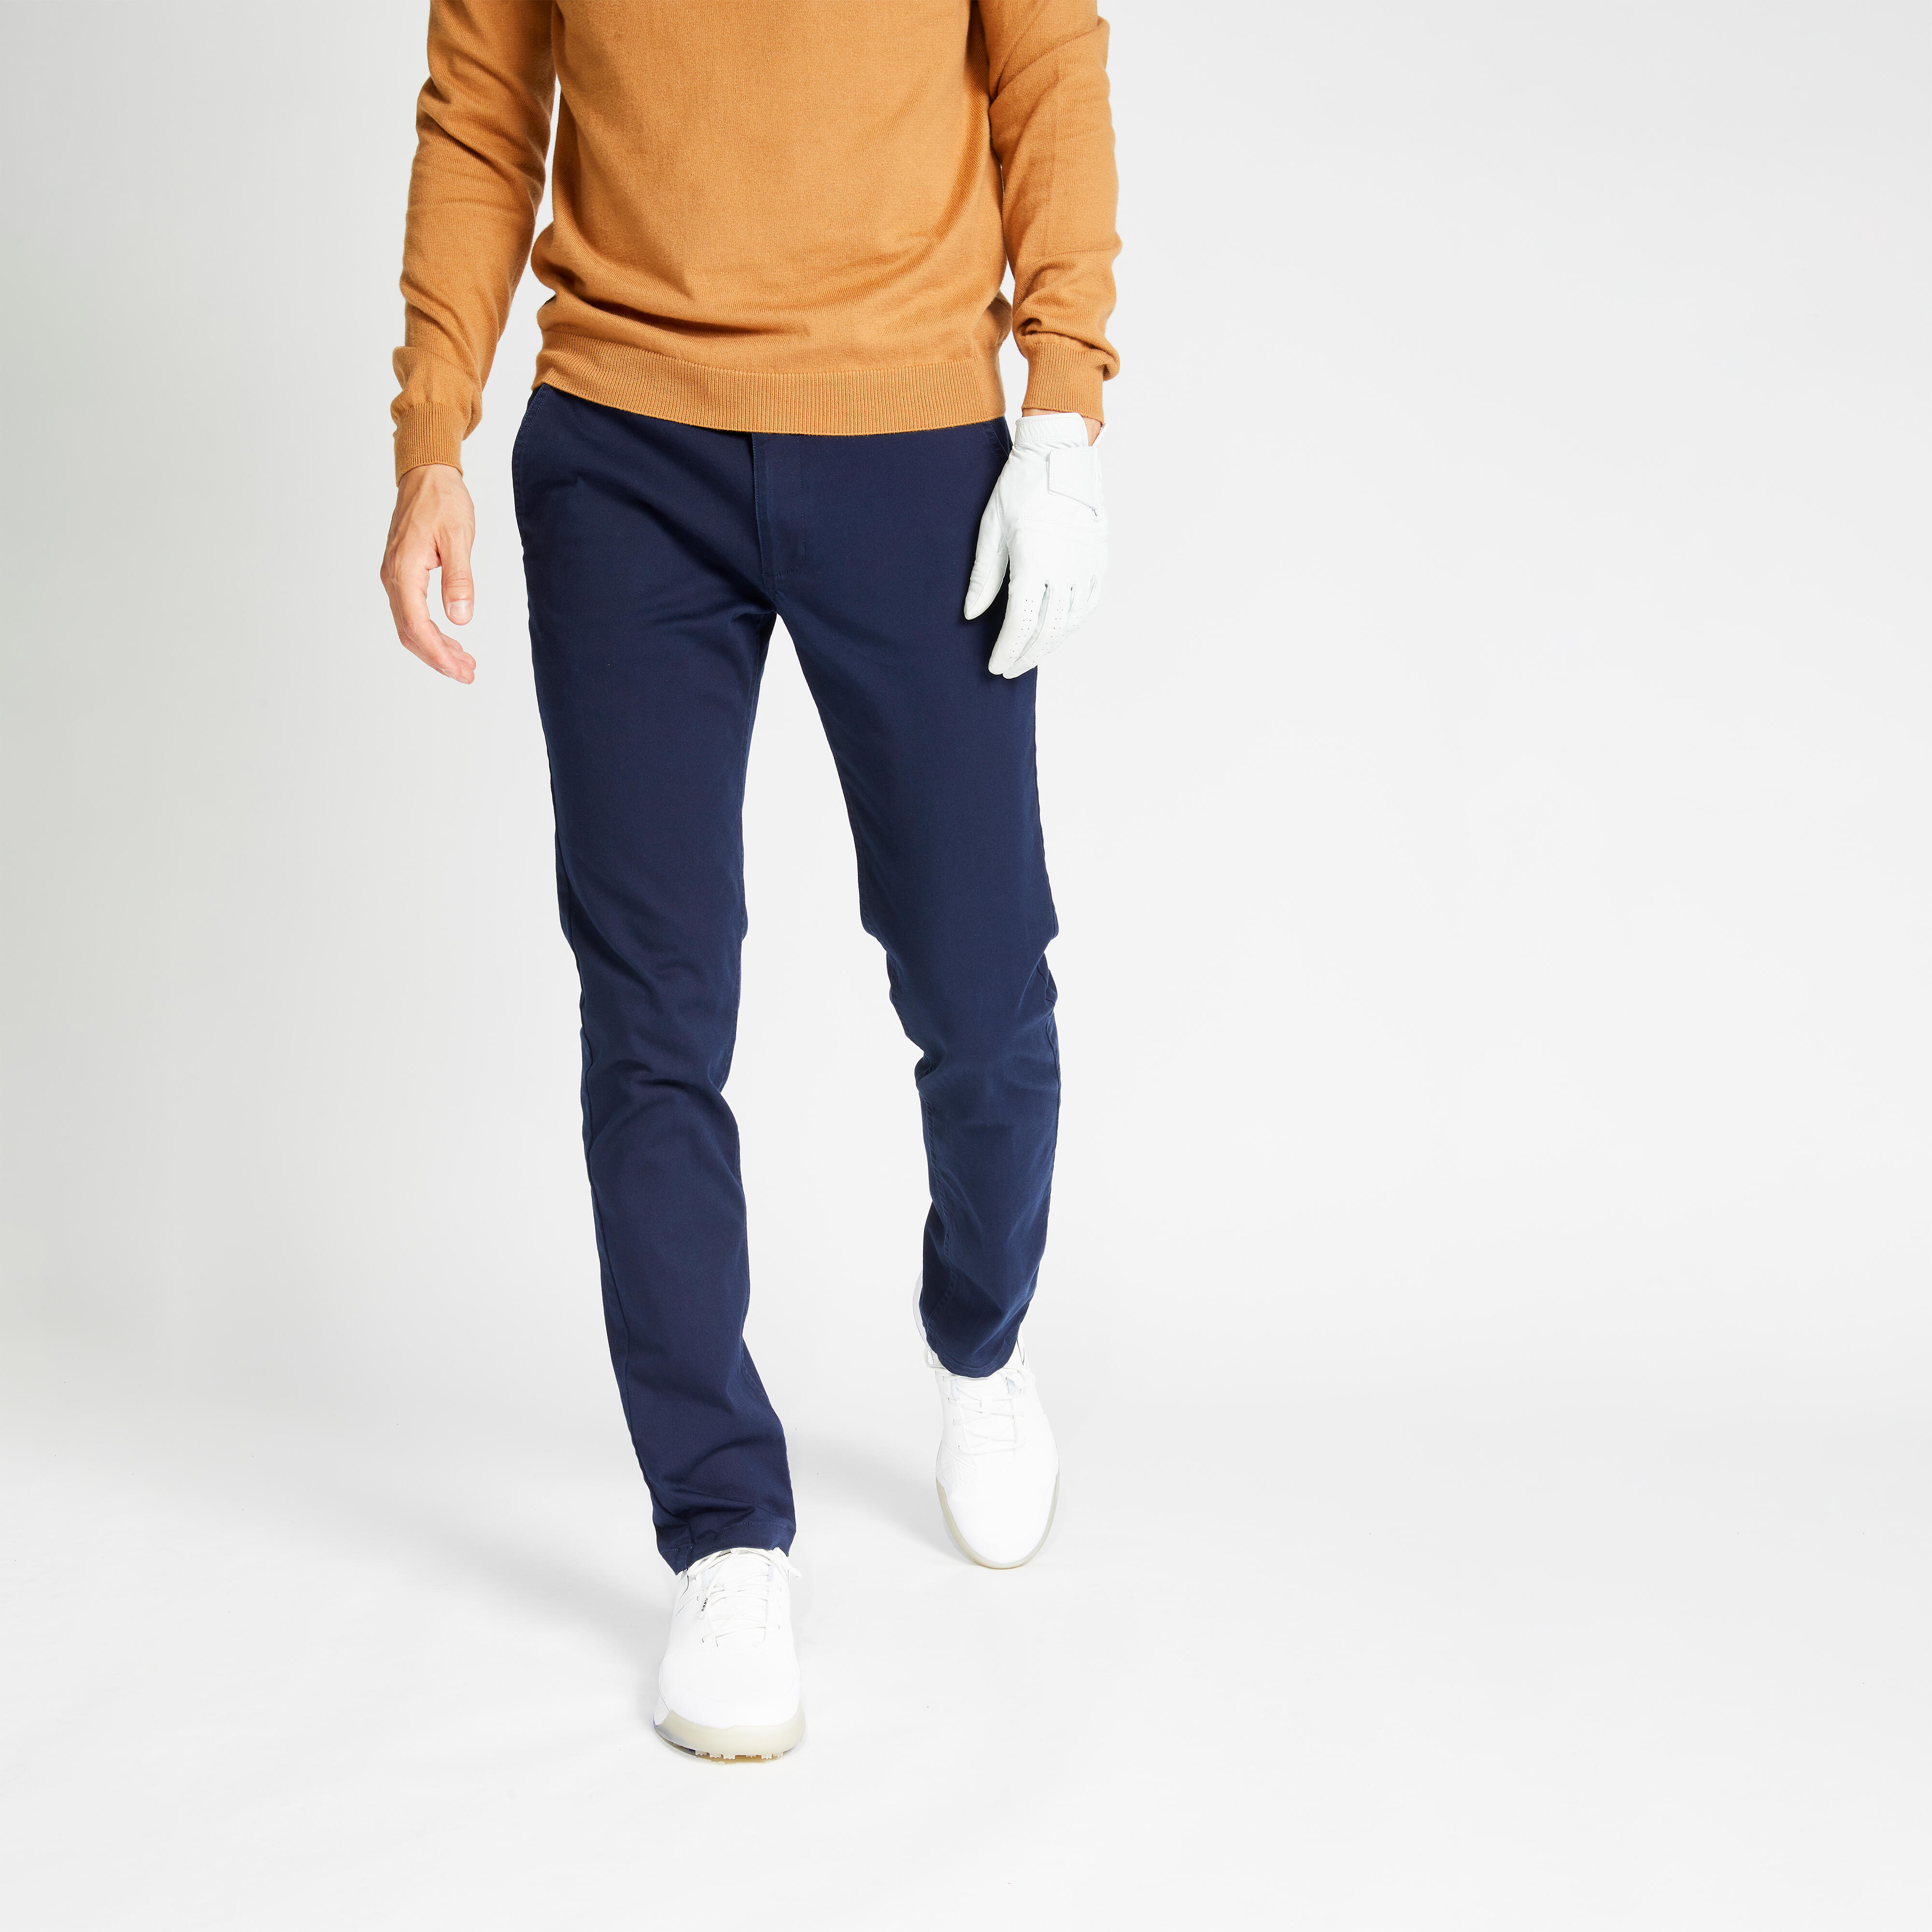 White Shirt Interview Outfits With Dark Blue And Navy Casual Trouser  White Shirt Blue Trousers Men  Casual wear mens apparel